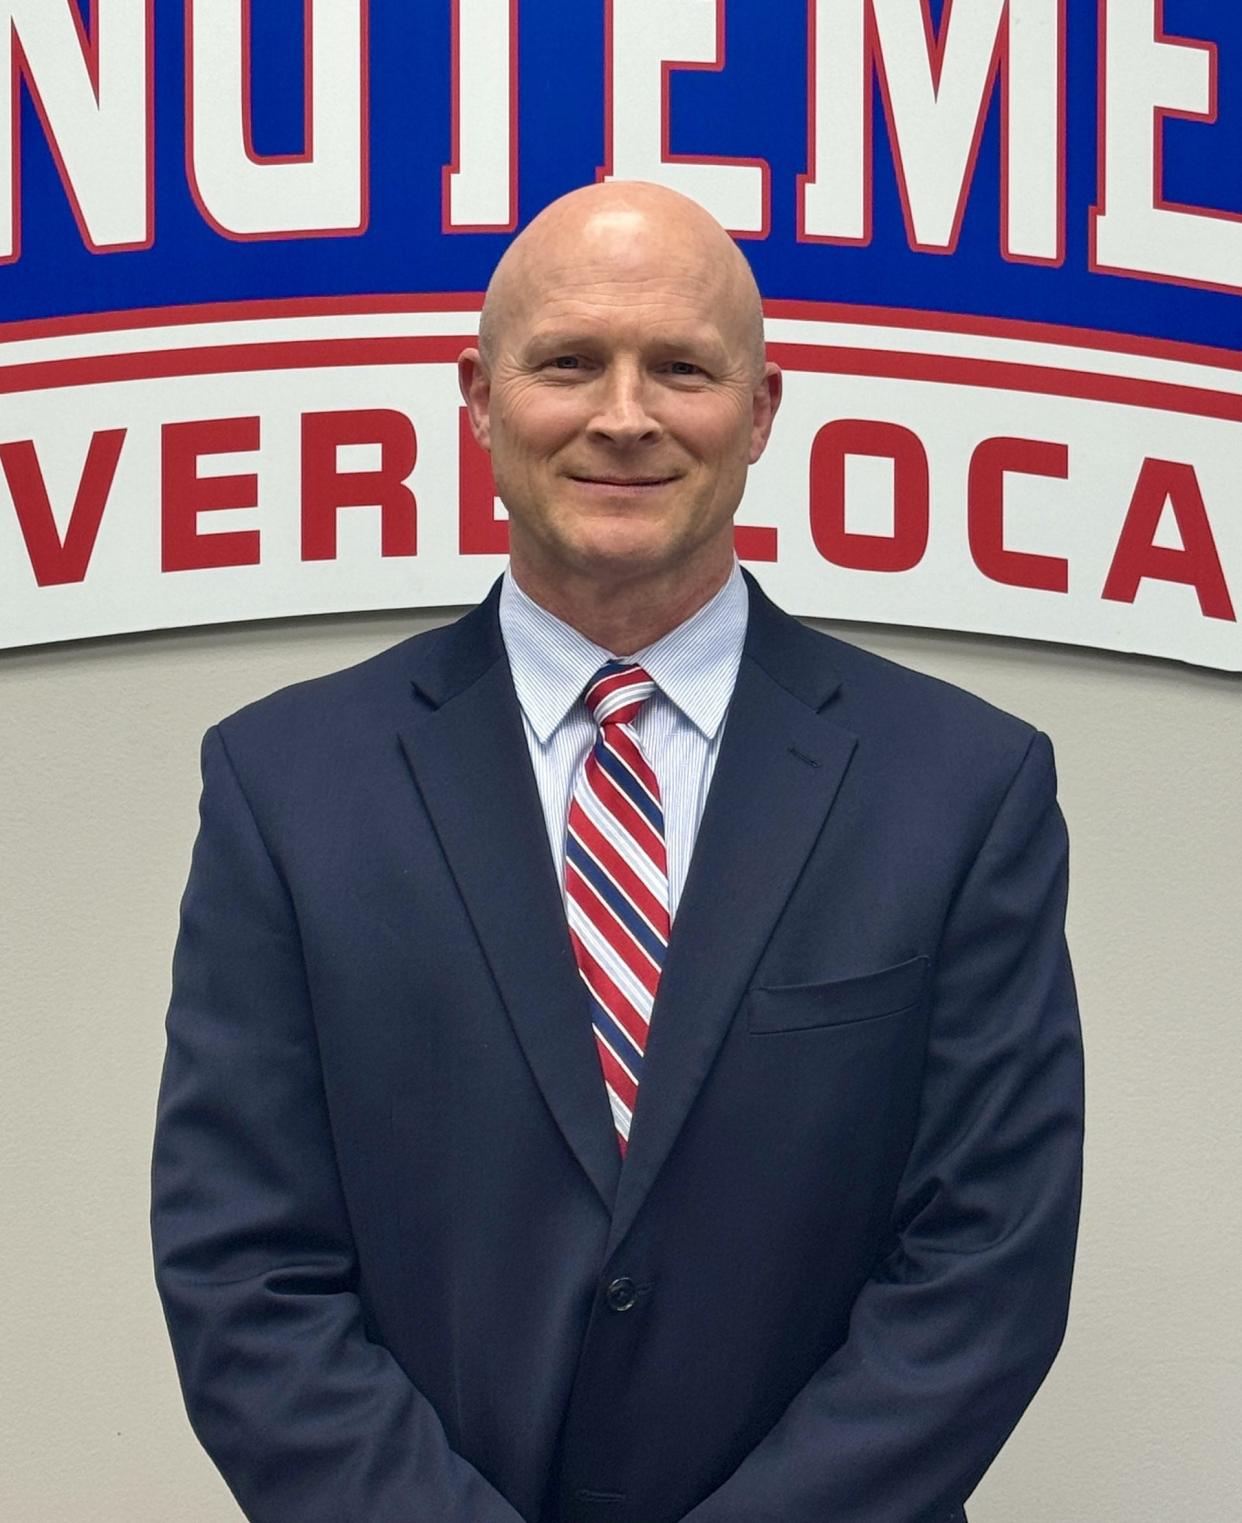 Daniel White, superintendent of Keystone Local School District in LaGrange, Ohio, was named the new Revere Local Schools superintendent at the Board of Education meeting Tuesday night. He begins on Aug. 1.